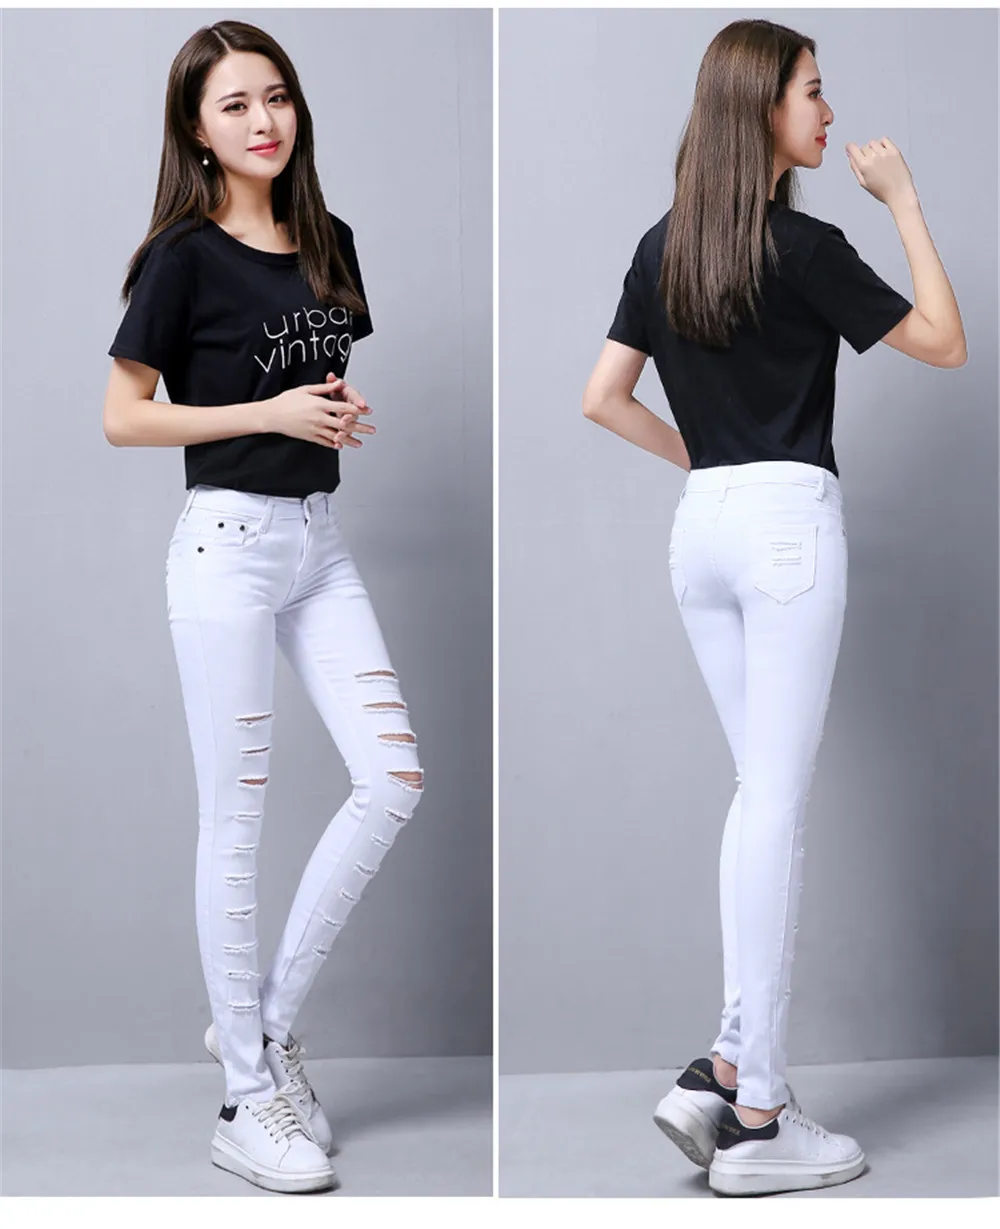 Whole cotton Hollow out hole Elastic force Pencil pants Leggings high waist jeans woman skinny women jeans mujer jean plus size